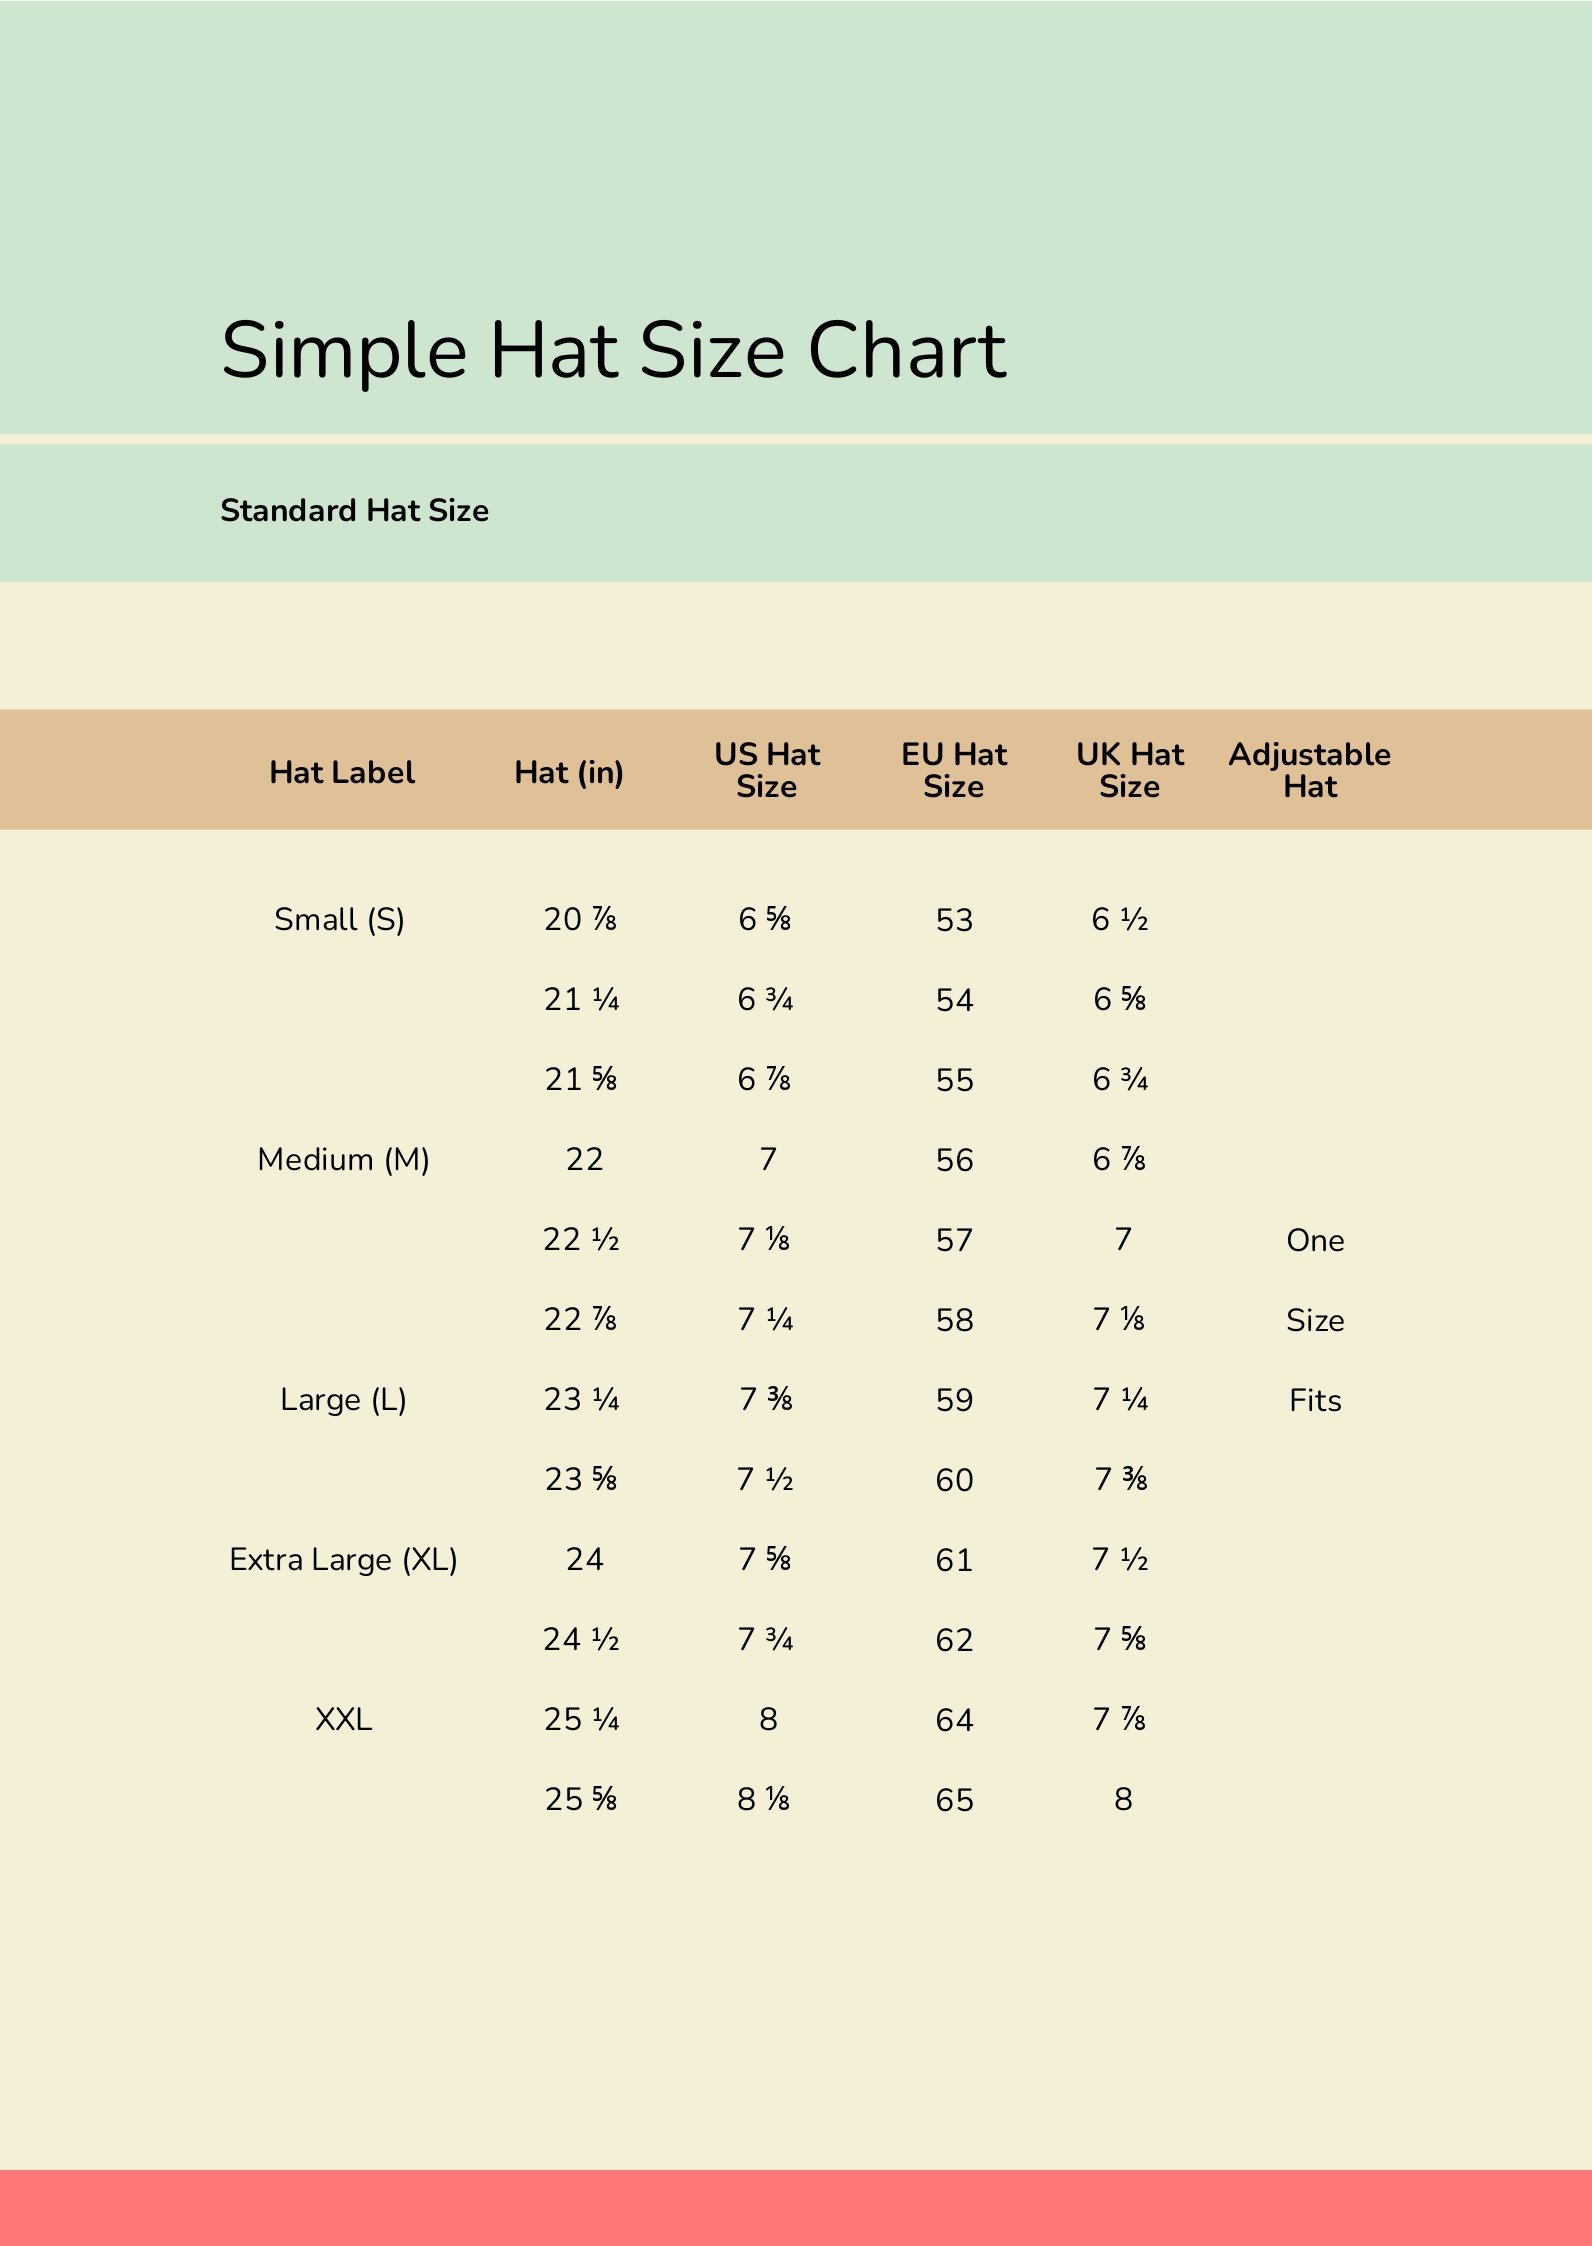 Simple Hat Size Chart